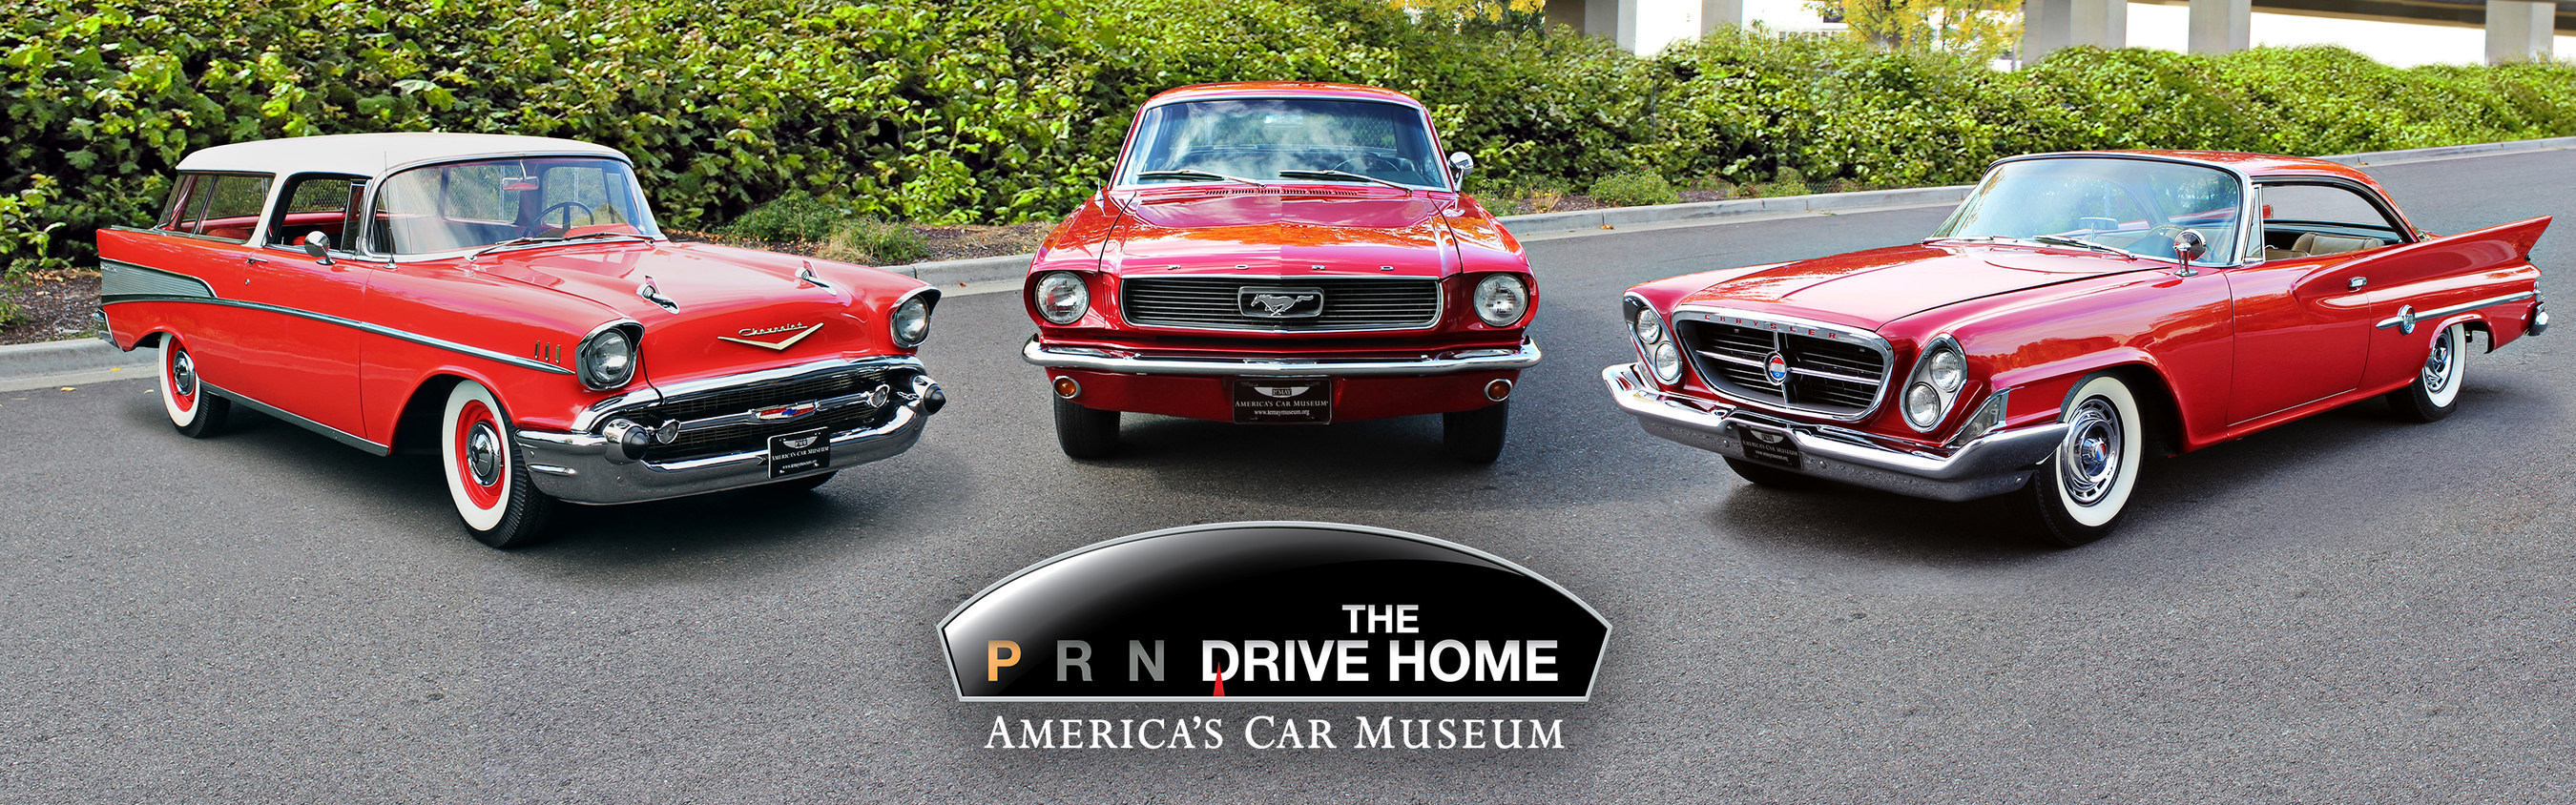 America's Car Museum and the North American International Auto Show Announce 'The Drive Home II: The Heritage Run'. Pictured are the three participating cars, a 1967 Chevrolet Nomad, a 1961 Chrysler 300G and a 1966 Ford Mustang.